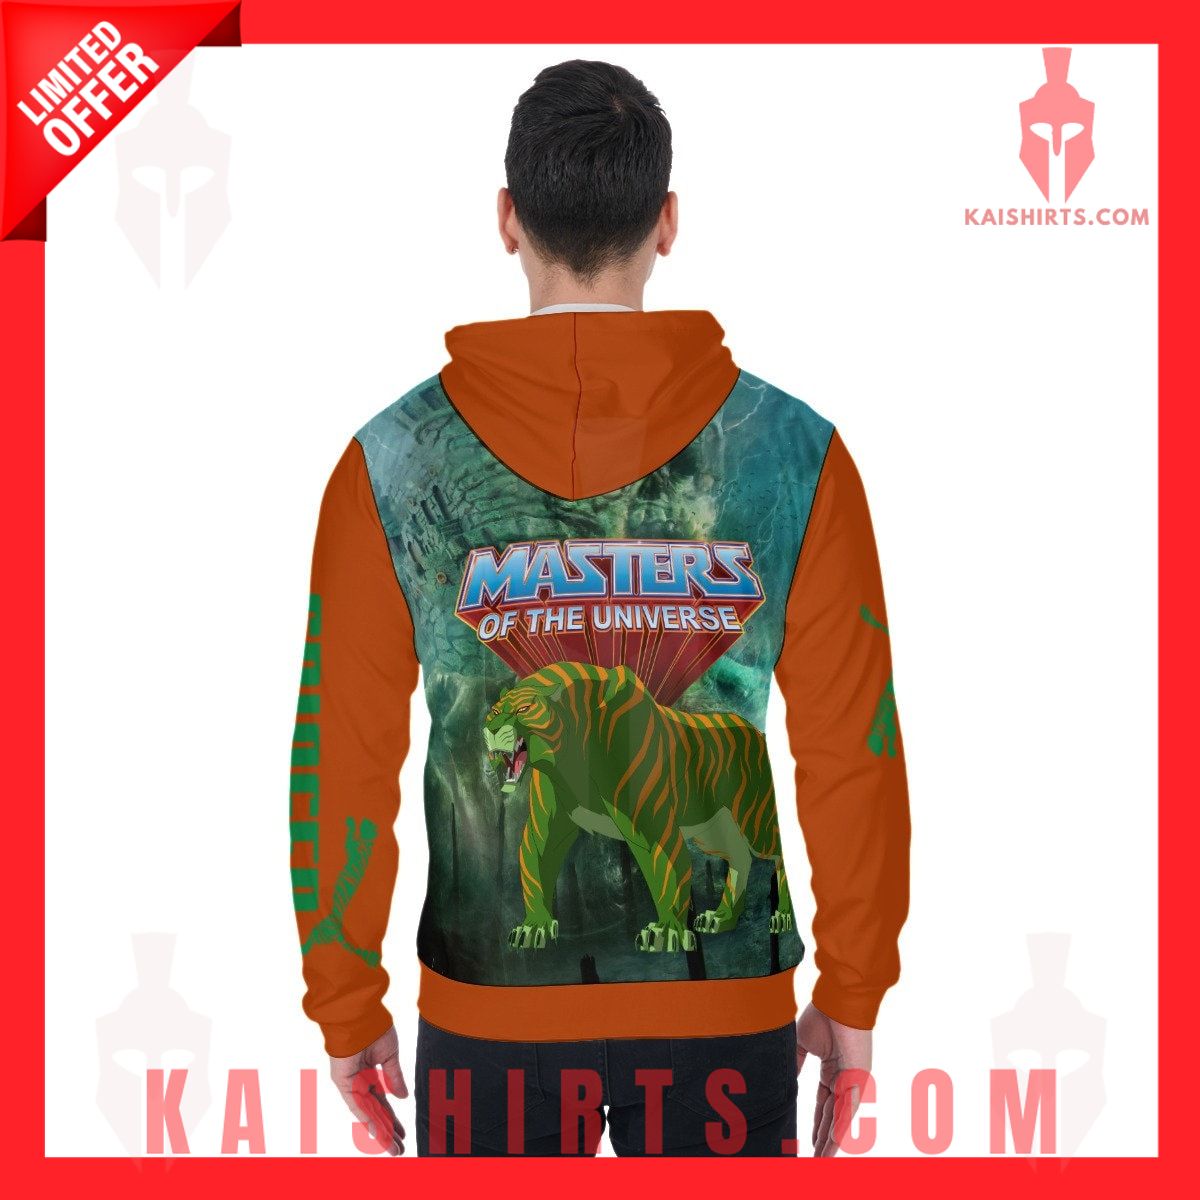 Cringer Masters of the Universe Zip Up Hoodie's Product Pictures - Kaishirts.com